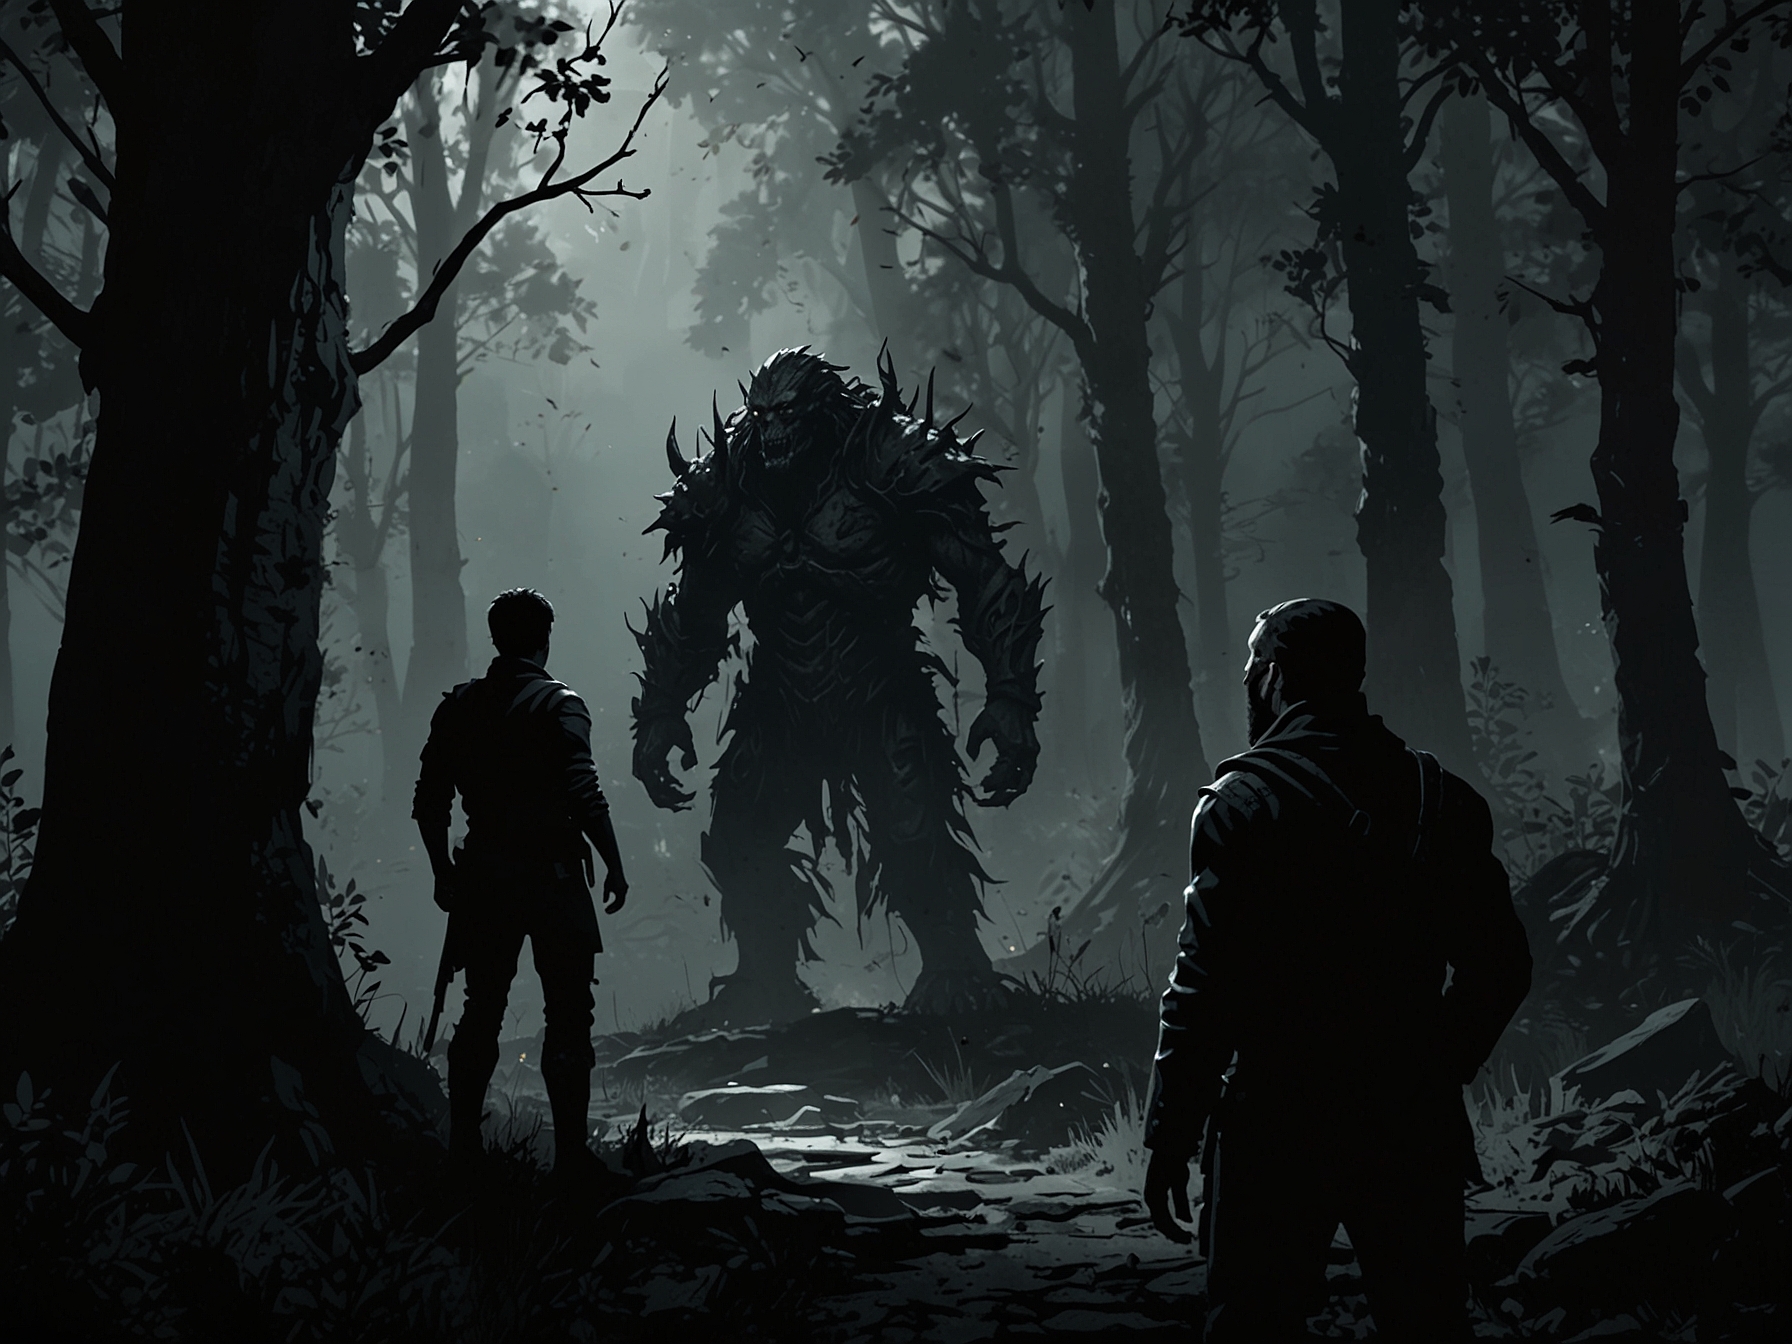 An image showcasing the player character engaging in dialogue with Thiollier near the brink of the Erdtree, surrounded by a hauntingly dark forest and ominous enemies lurking in the shadows.